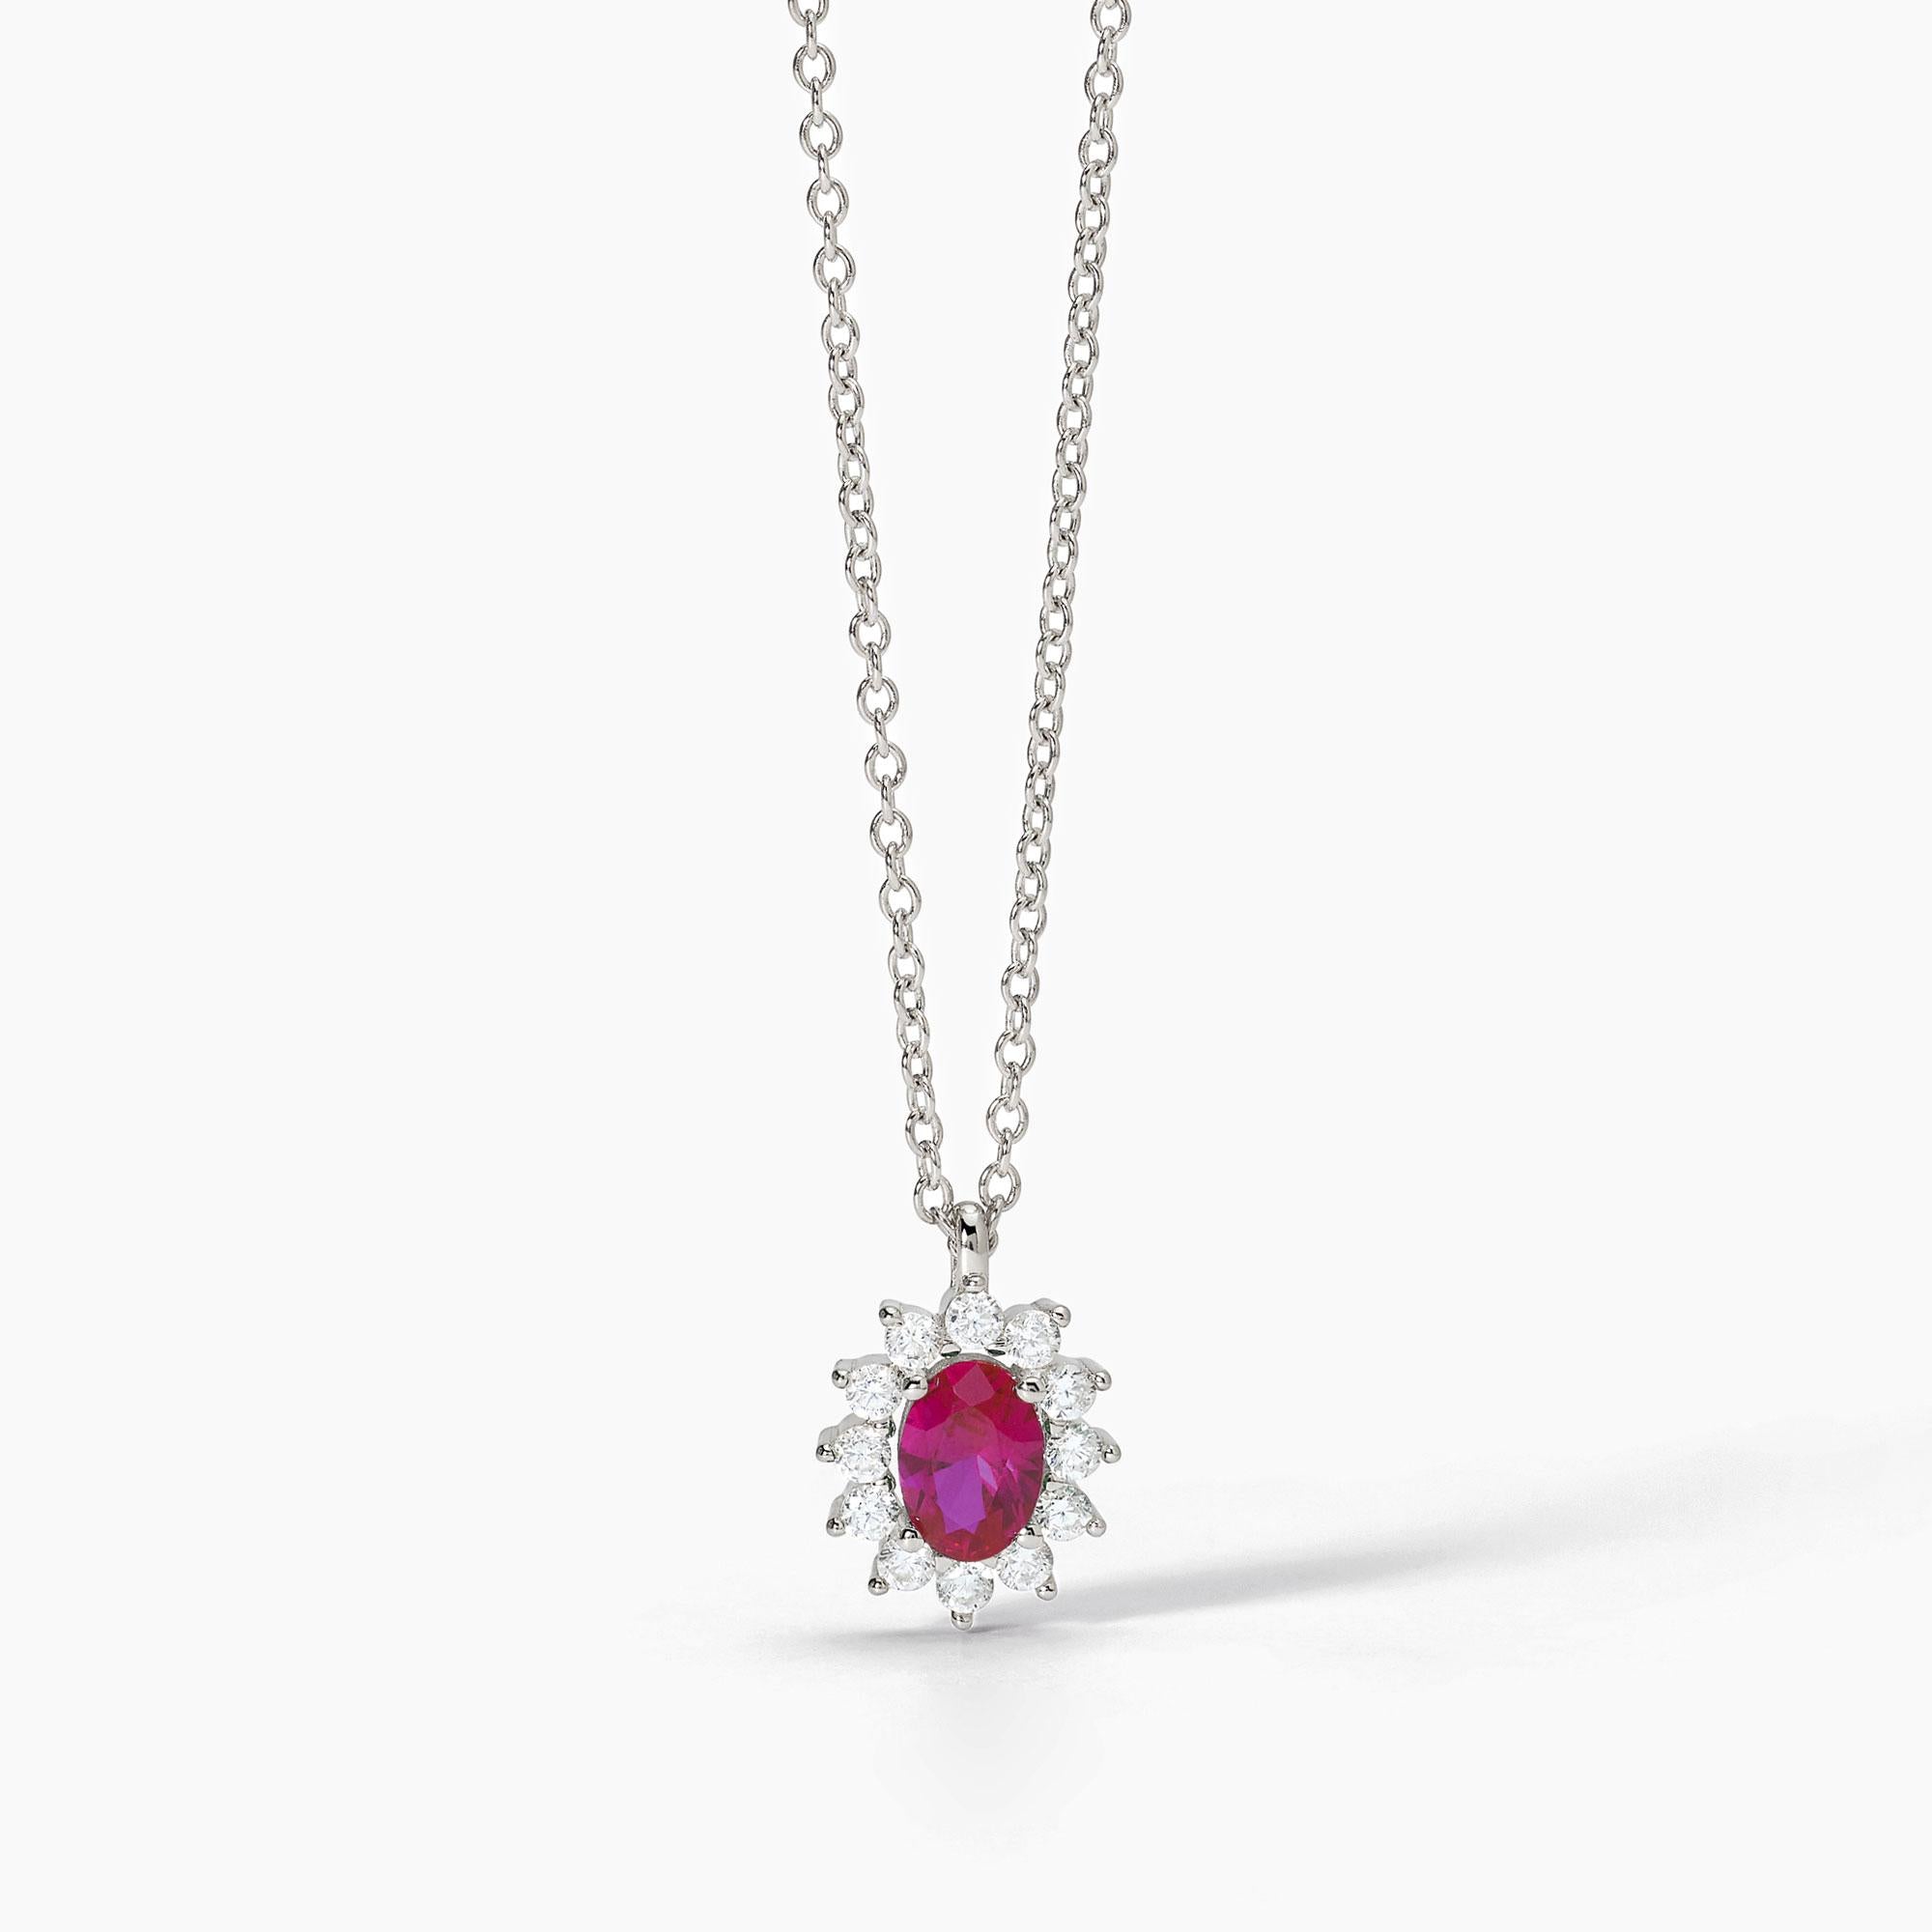 Mabina Woman - Silver necklace with synthetic ruby ​​COOL OR RÉTRO? - 553647